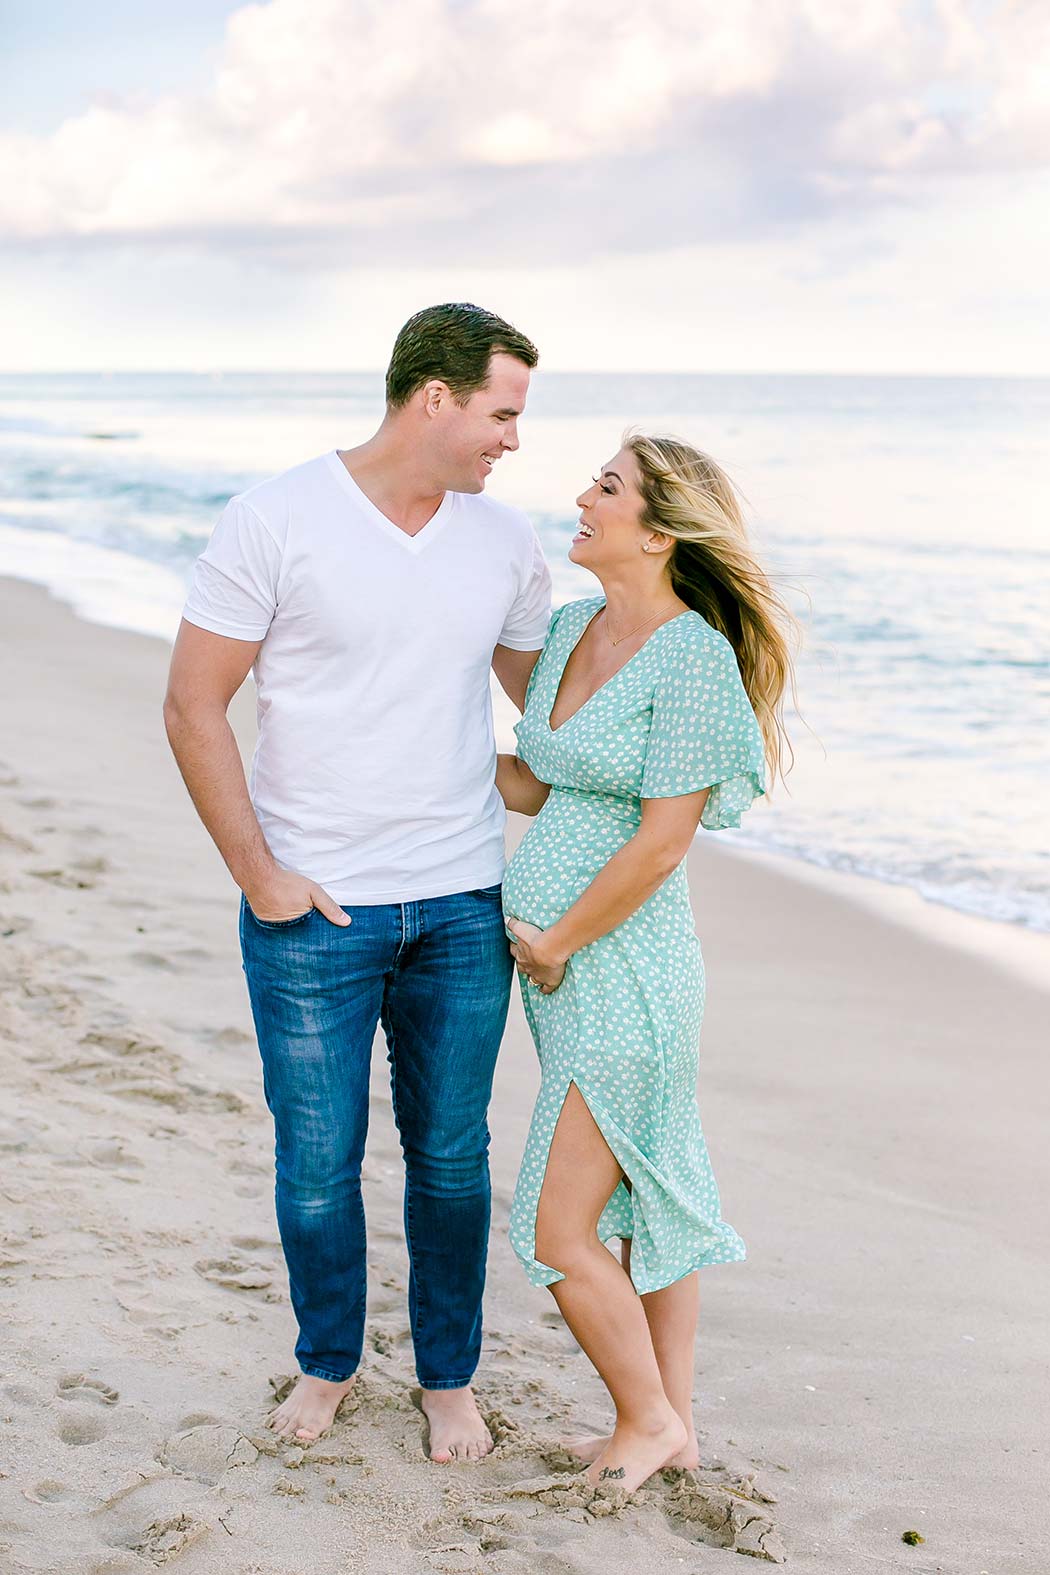 maternity poses for expectant mothers | fort lauderdale beach maternity photoshoot | maternity pose on beach | maternity beach photography | fort lauderdale beach maternity photographer